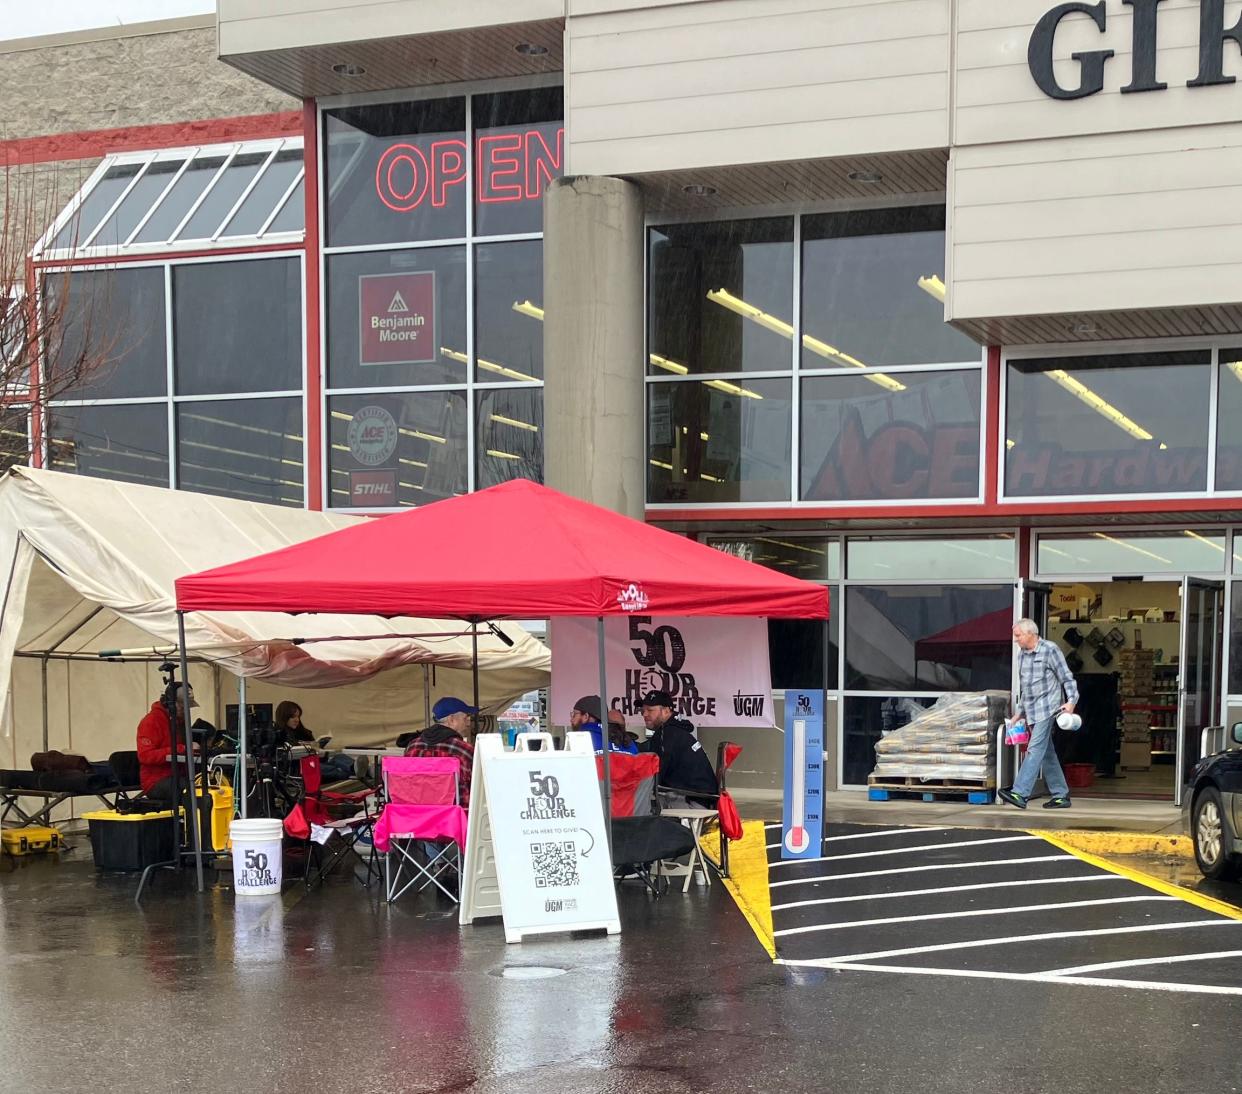 Union Gospel Mission of Salem leaders camp outside during the 50-Hour Challenge at the entrance to the south Salem Ace Hardware to raise awareness of homelessness and money.